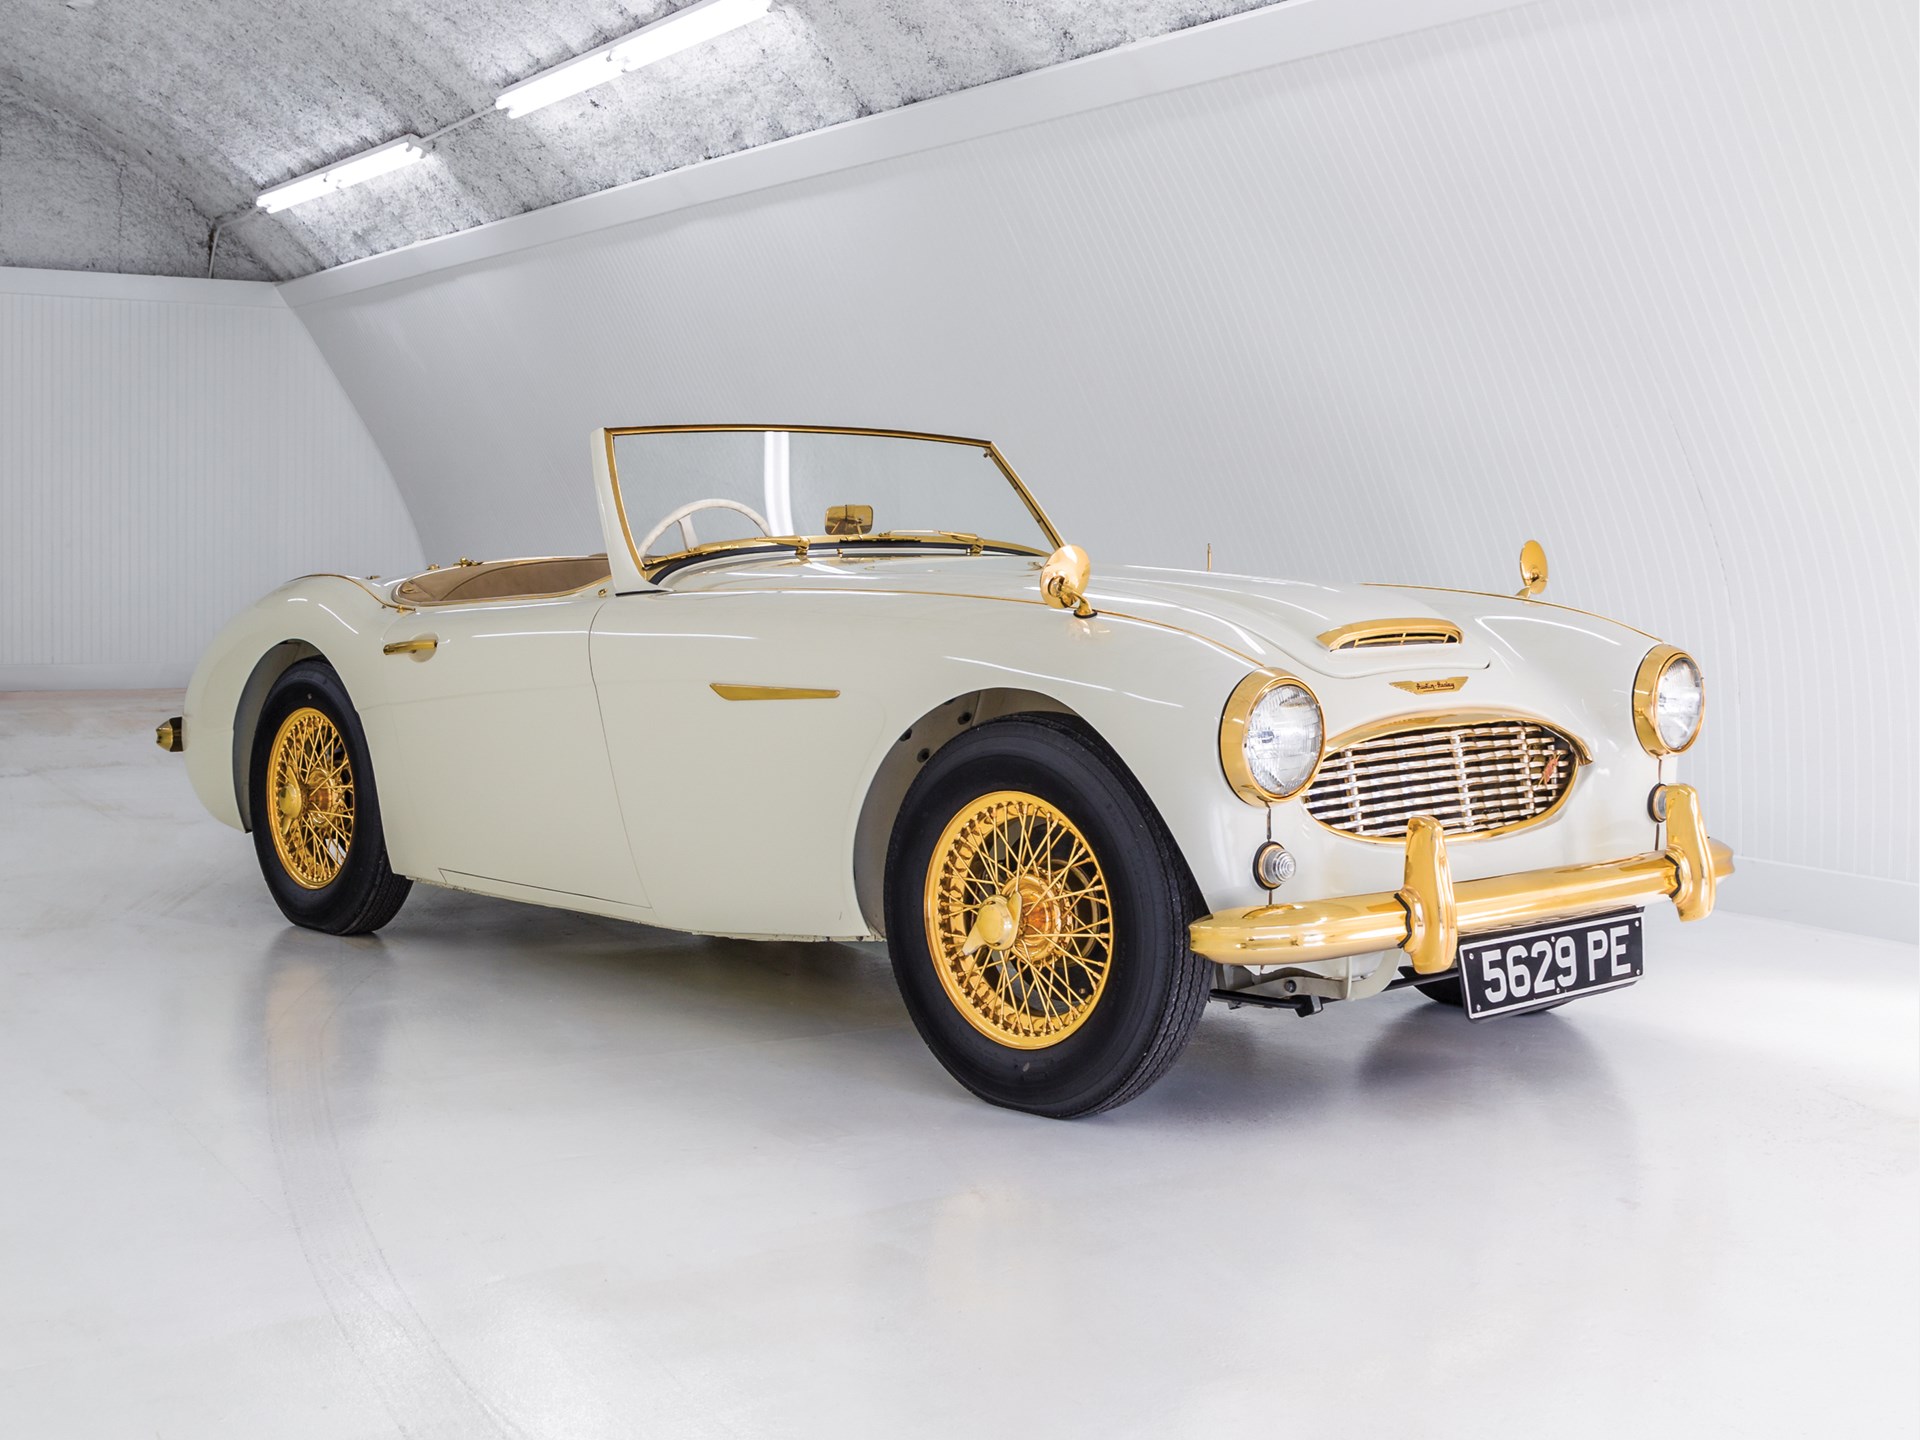 Austin Healey 100/6 - Goldie - at Sotherby's Auction in December 2017